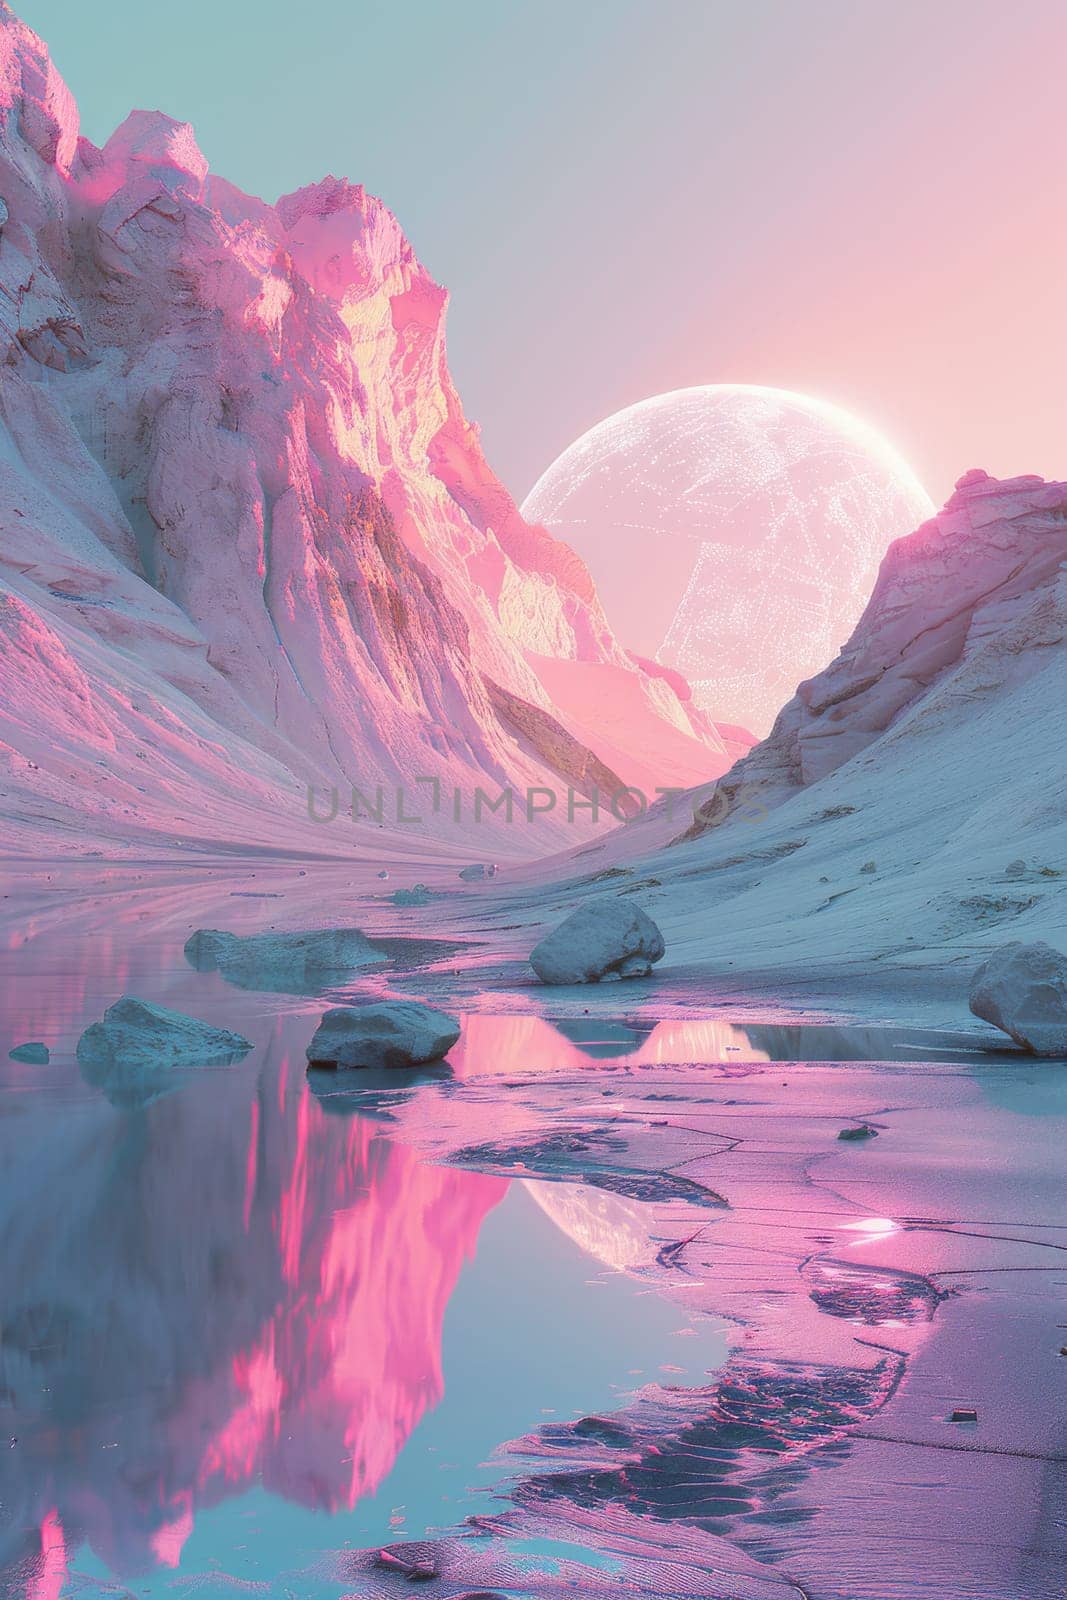 A mountain range with a pink moon in the sky. The sky is pink and the mountains are covered in snow